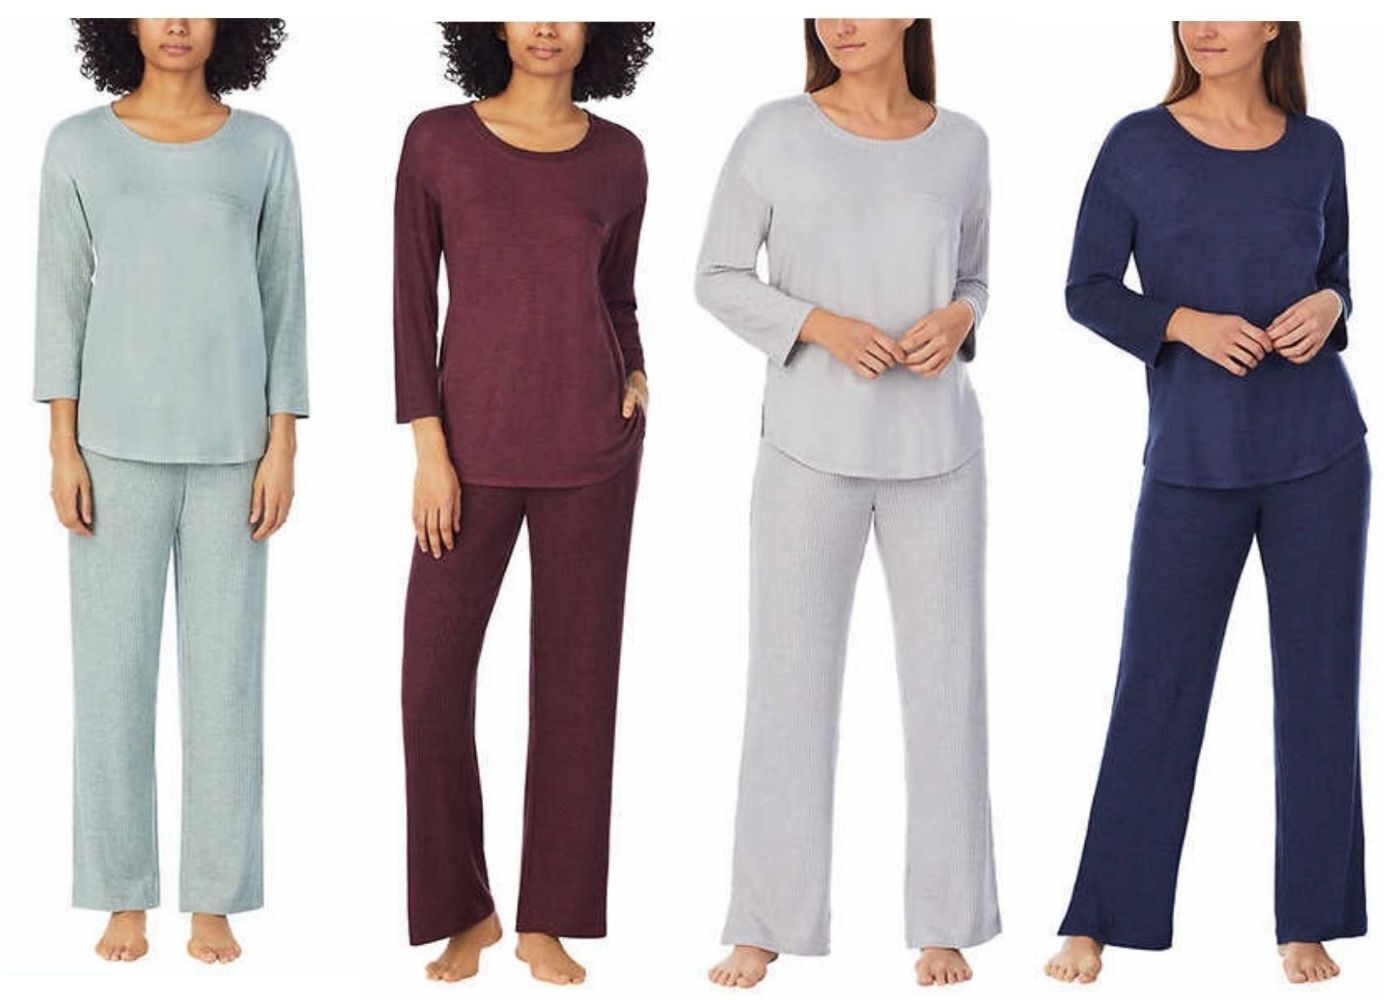 Midnight by Carole Hochman Scoop Neck Pajama Sets for Women